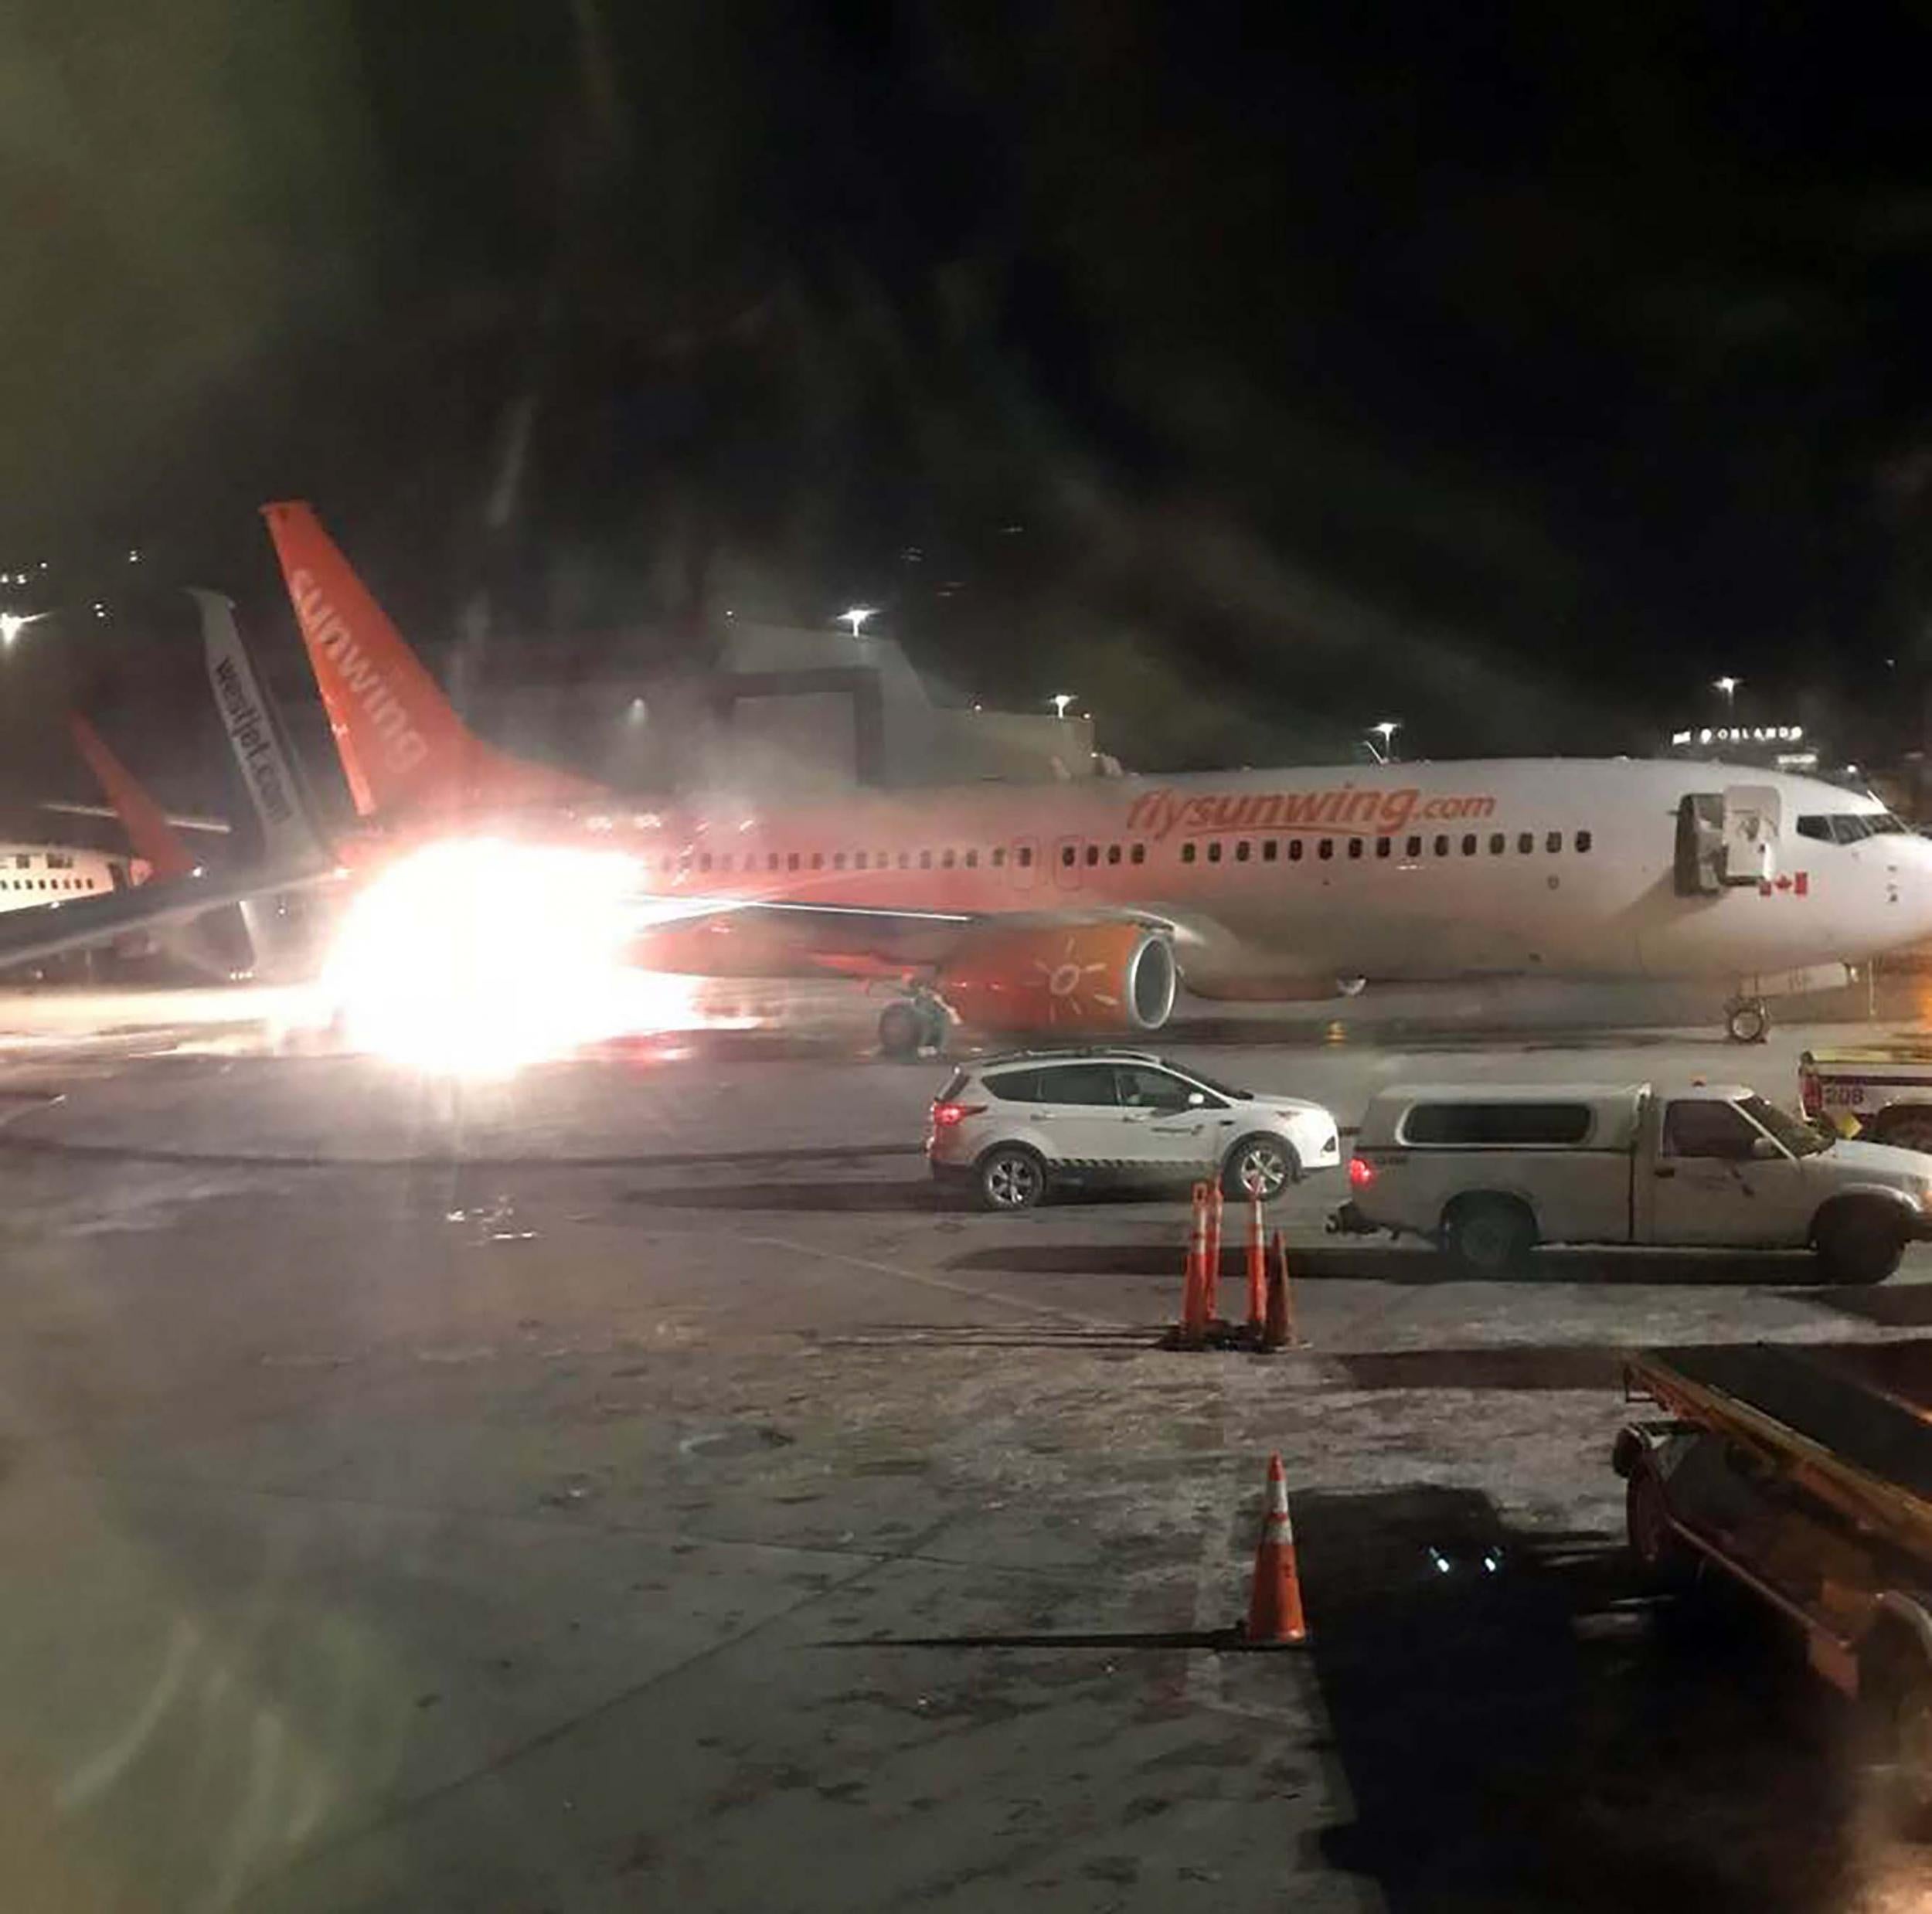 The Sunwing plane caught fire after colliding with Westjet flight